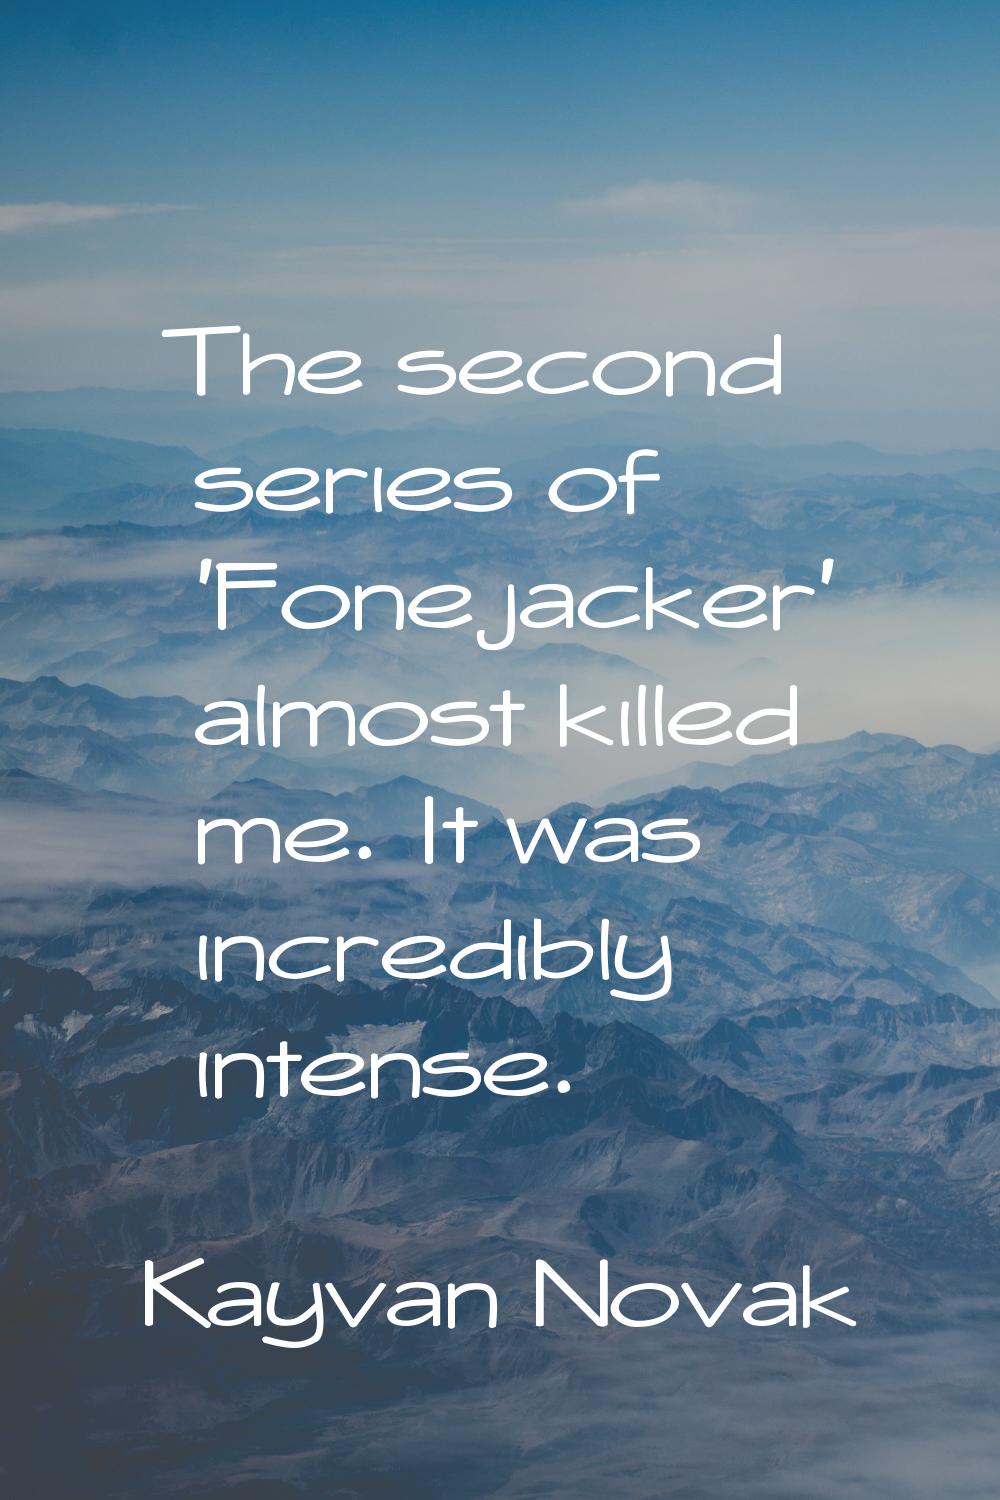 The second series of 'Fonejacker' almost killed me. It was incredibly intense.